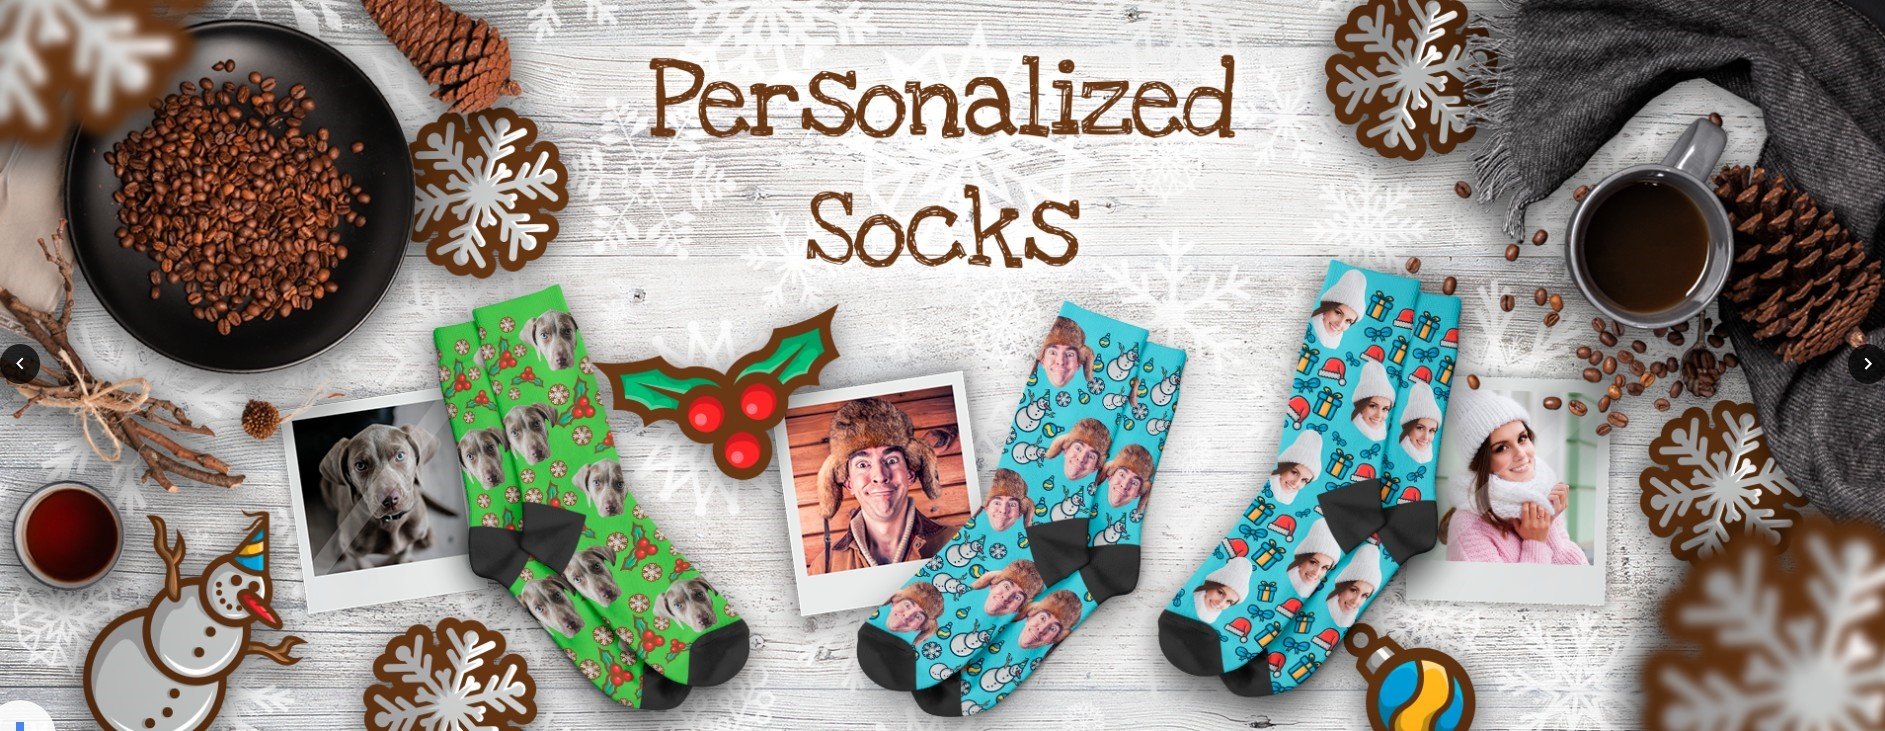 Personalized Socks   How To Stay Warm And Fun On Winter Evenings